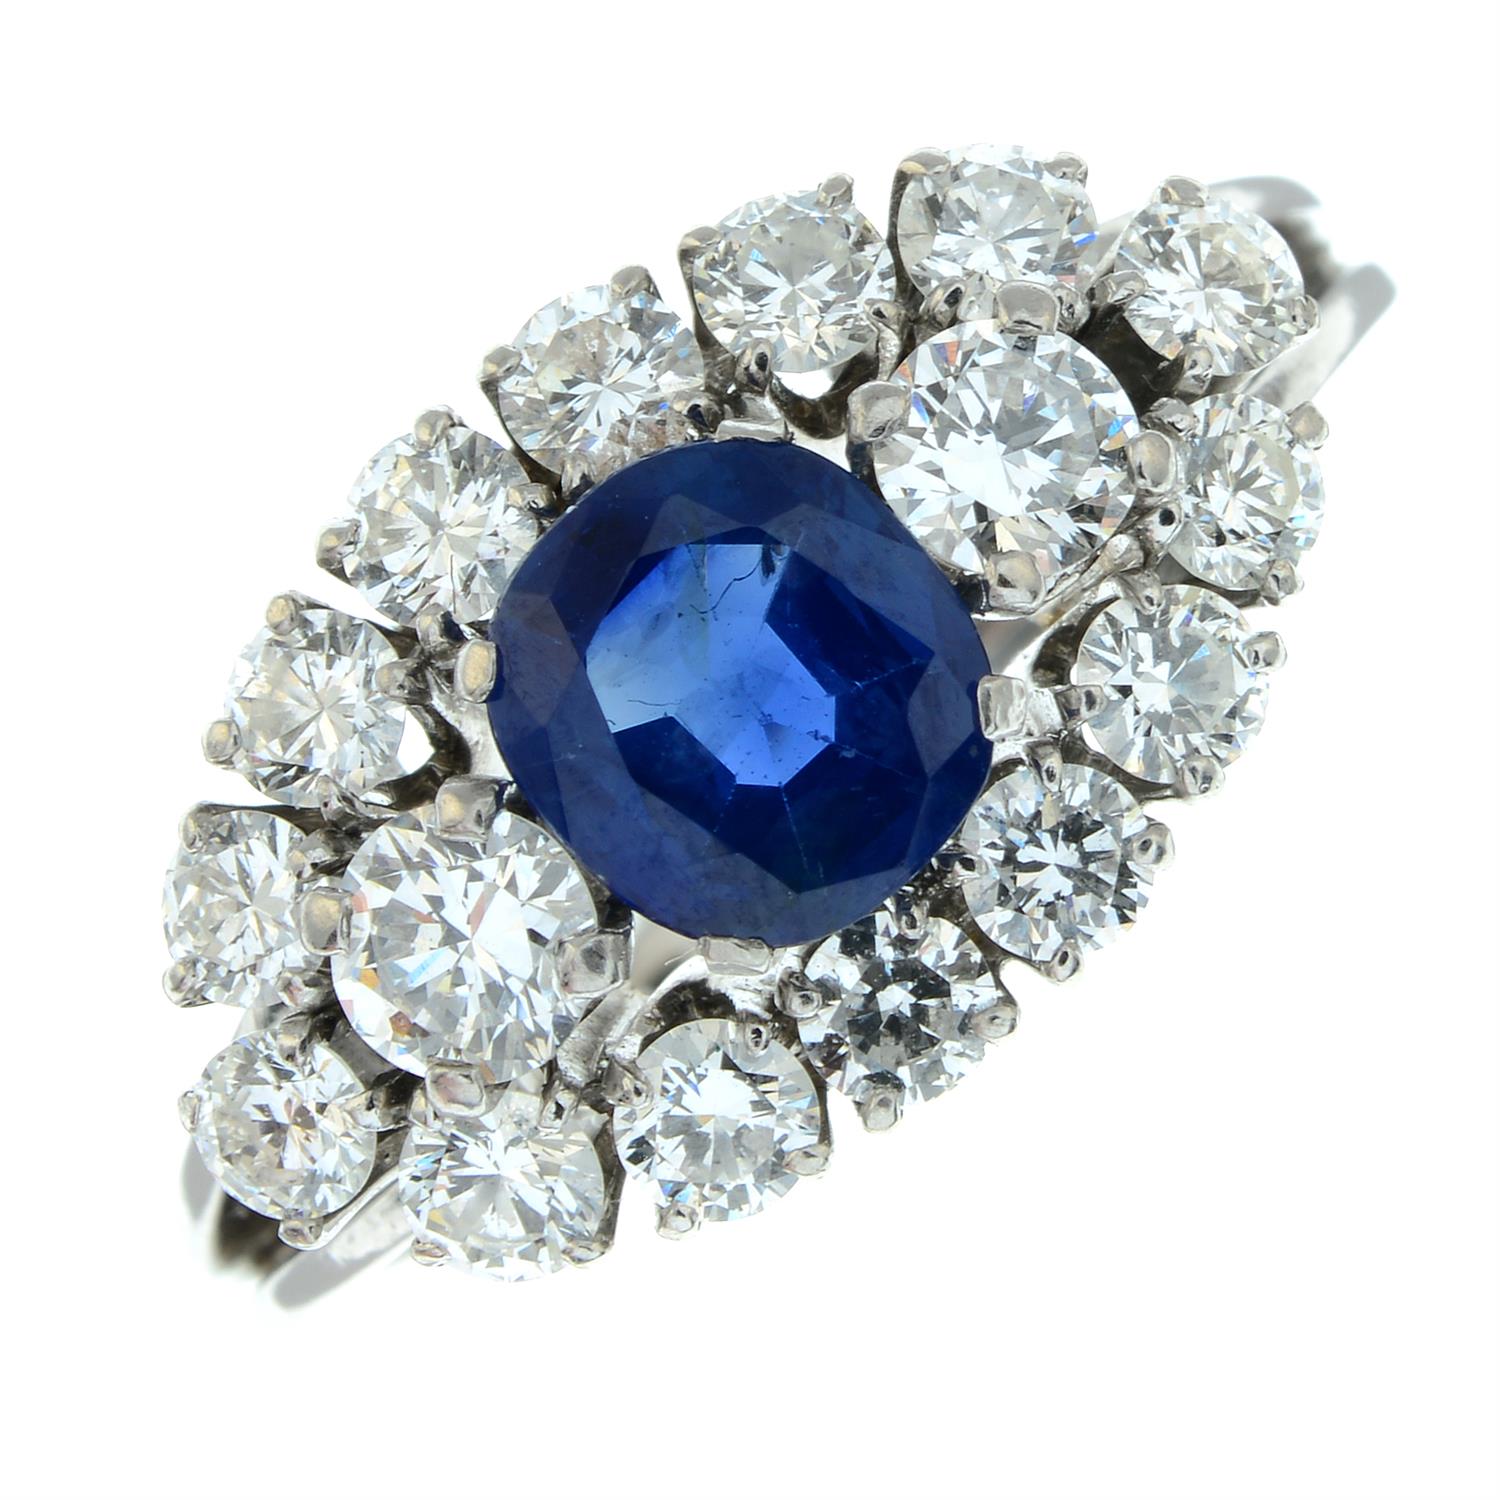 A Basaltic sapphire and brilliant-cut diamond dress ring. - Image 2 of 5